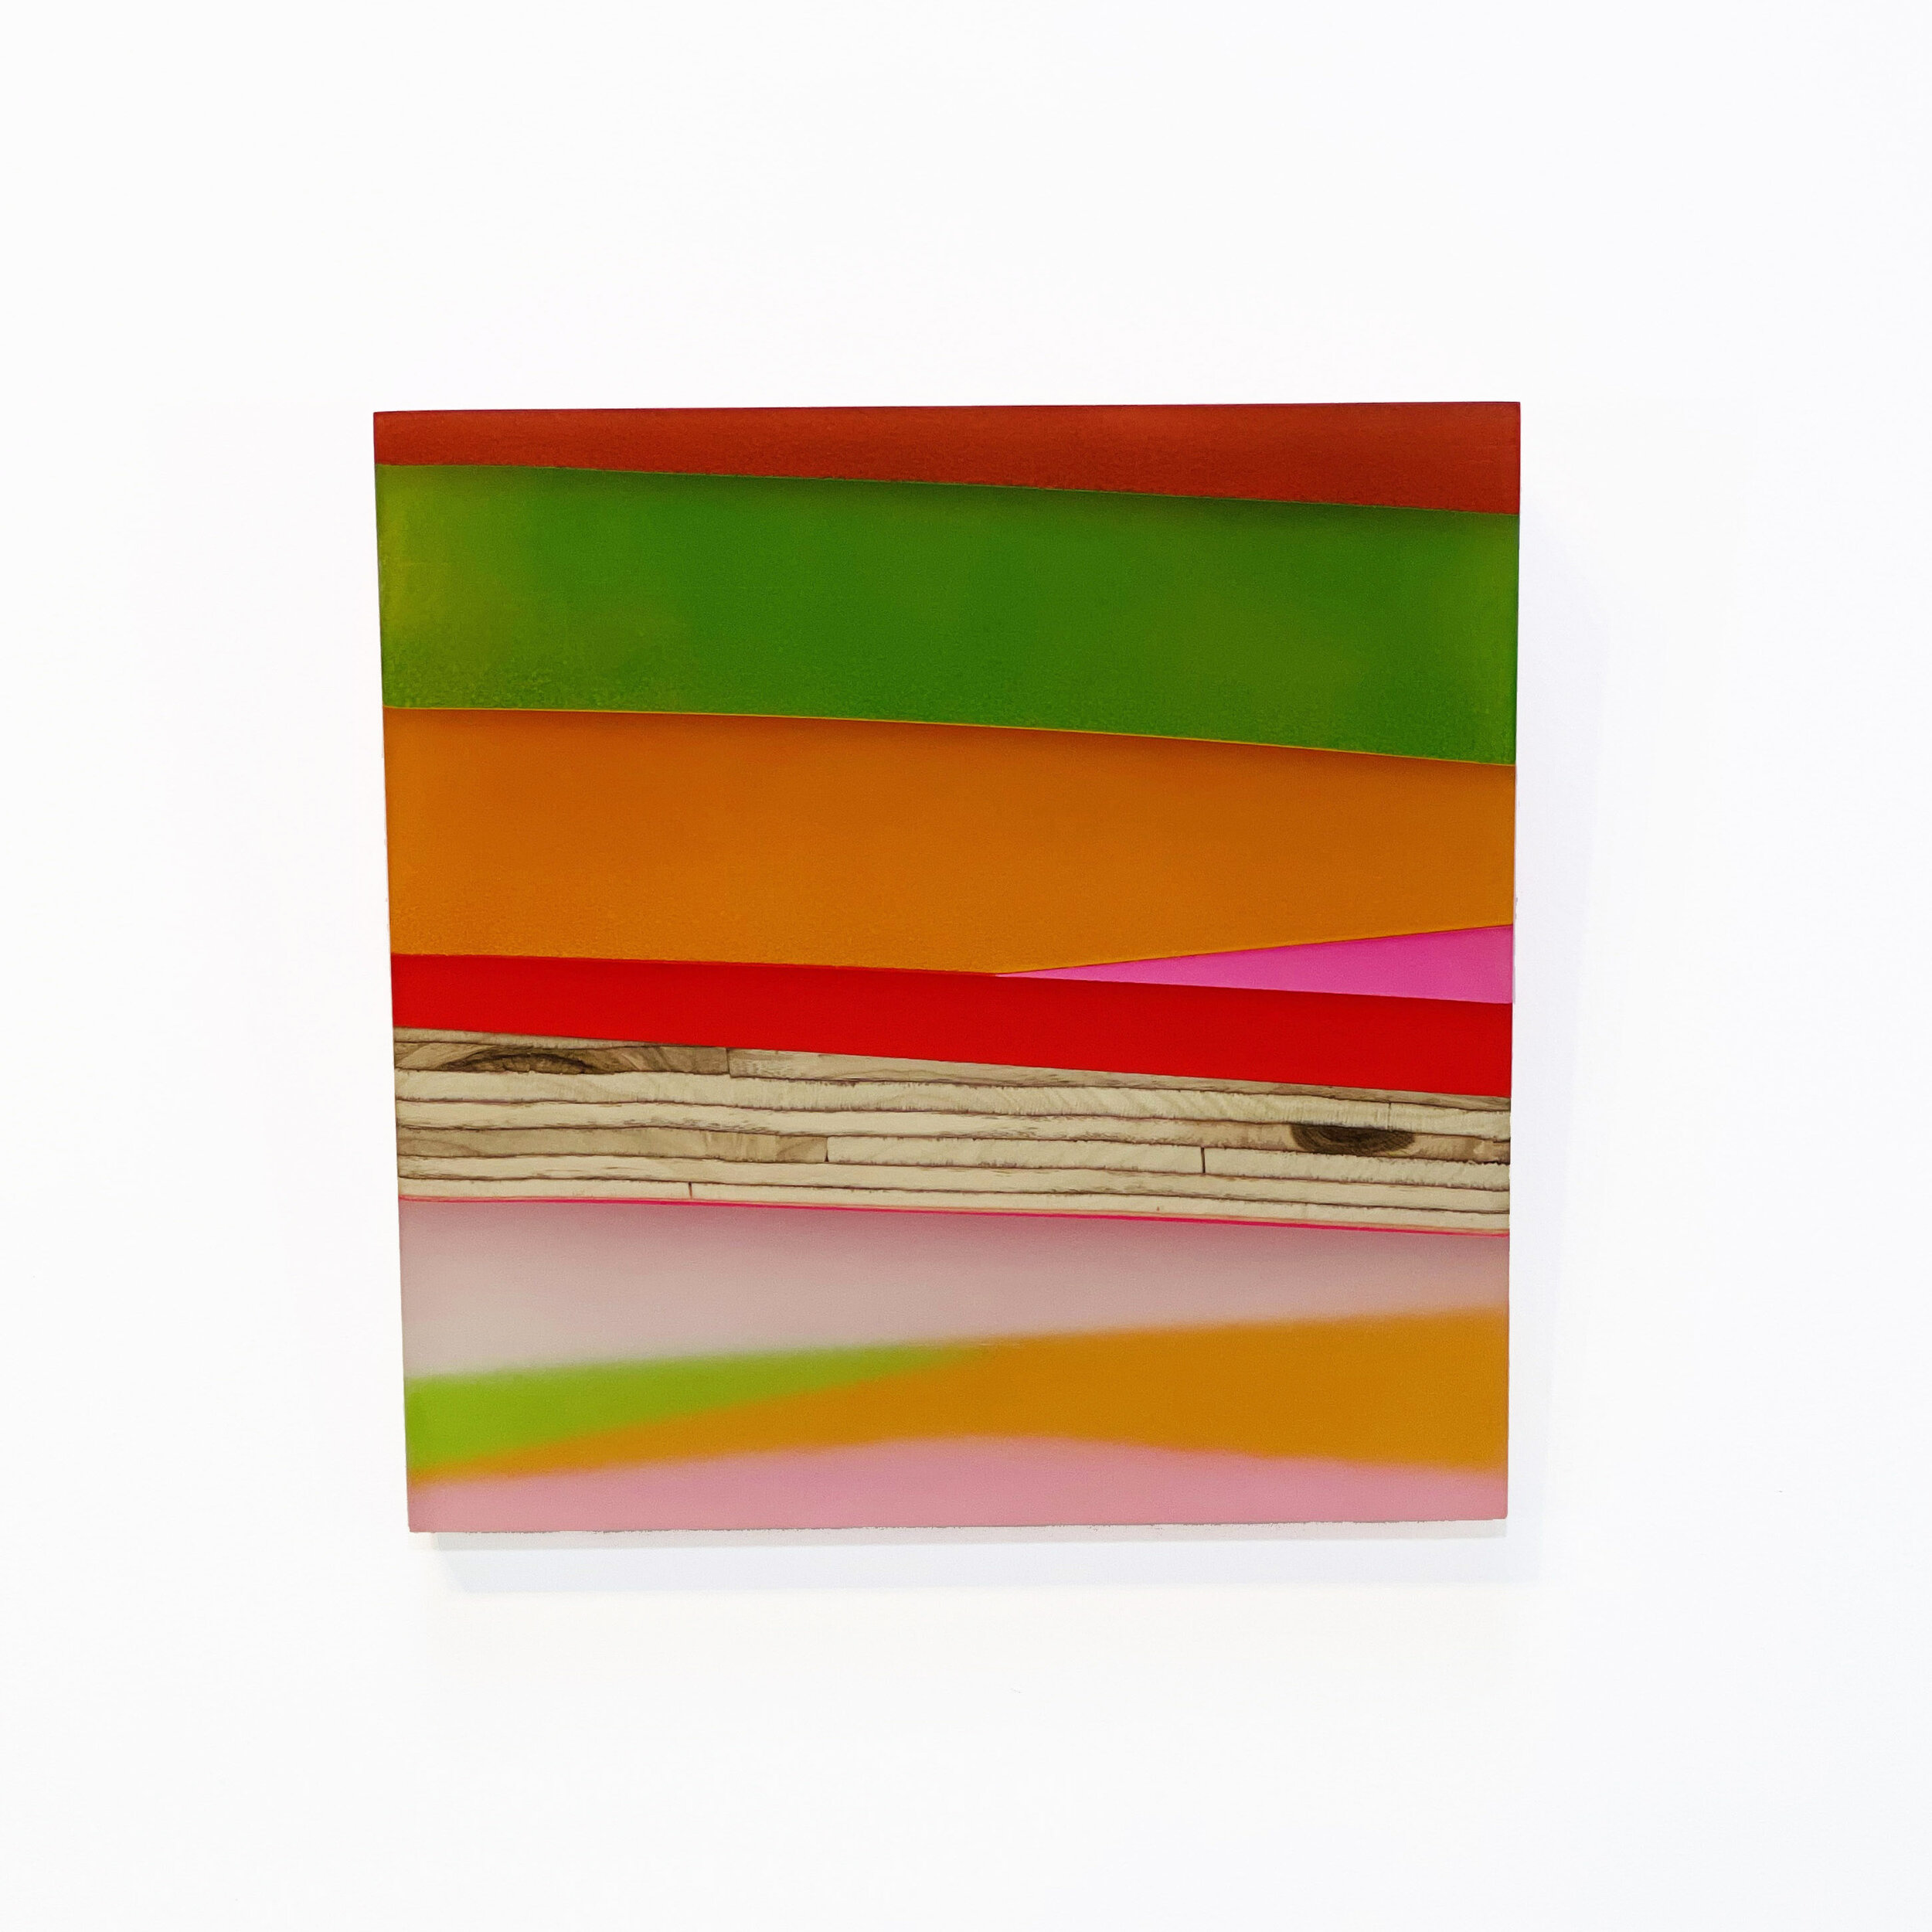 MICHELLE BENOIT | Evenfall, 11.2 x 11.4 x 3.4 inches / 29.7 x 29 x 8.6 cm, mixed media on hand cut apple-ply and lucite, 2020